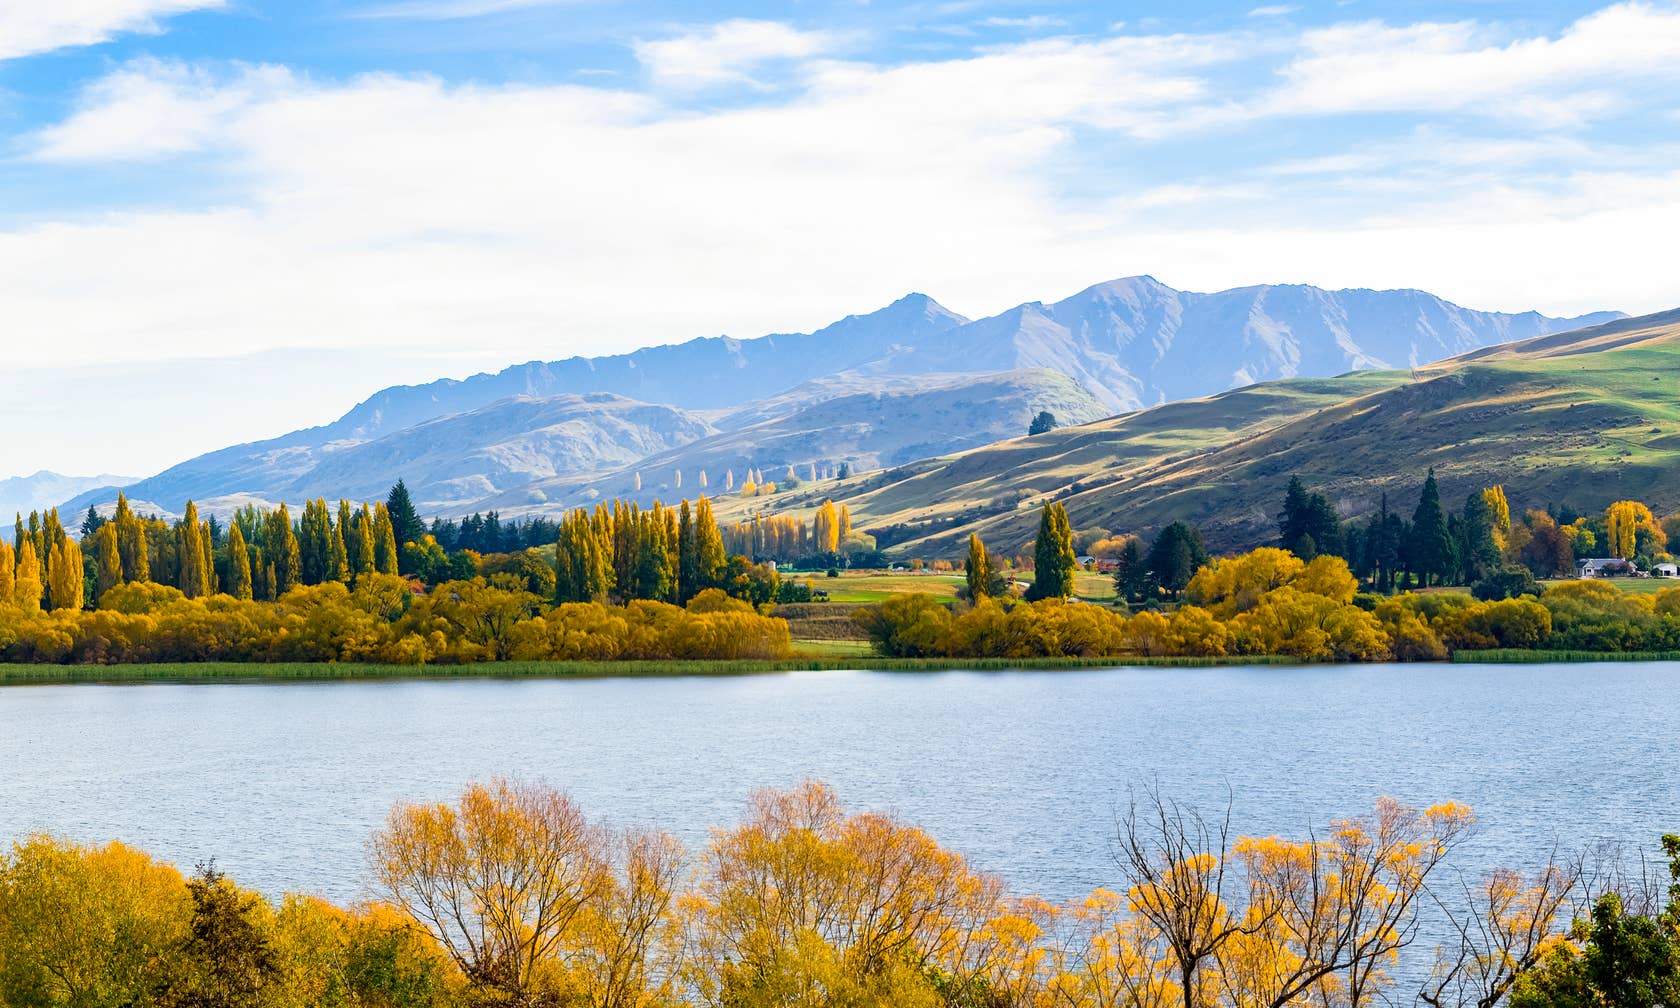 Holiday rentals in Arrowtown